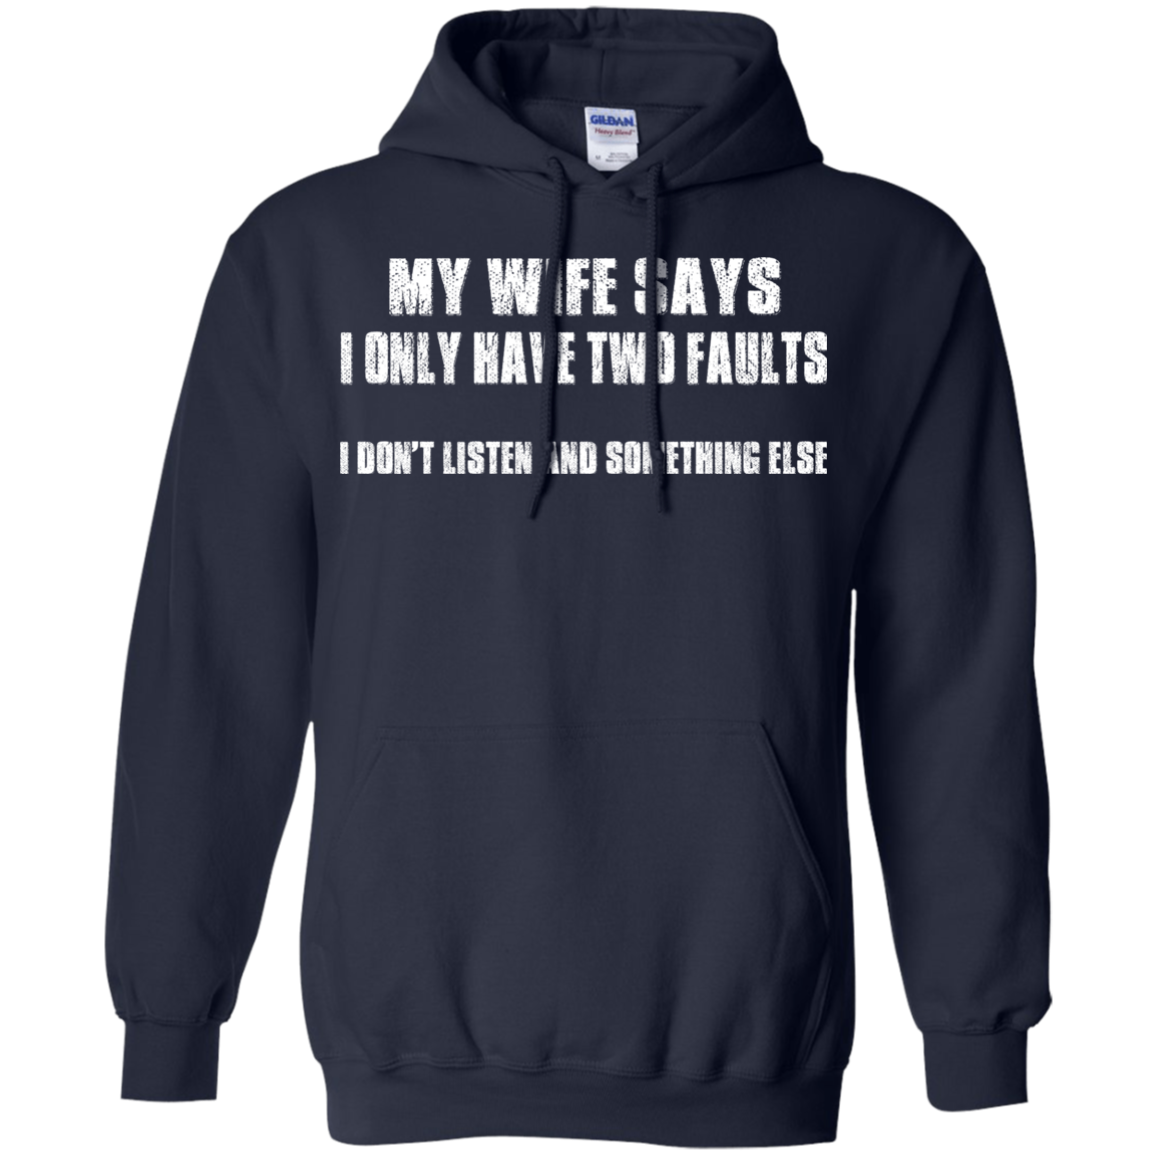 My Wife Says I Only Have Two Faults Shirt, Hoodie - TeeDragons